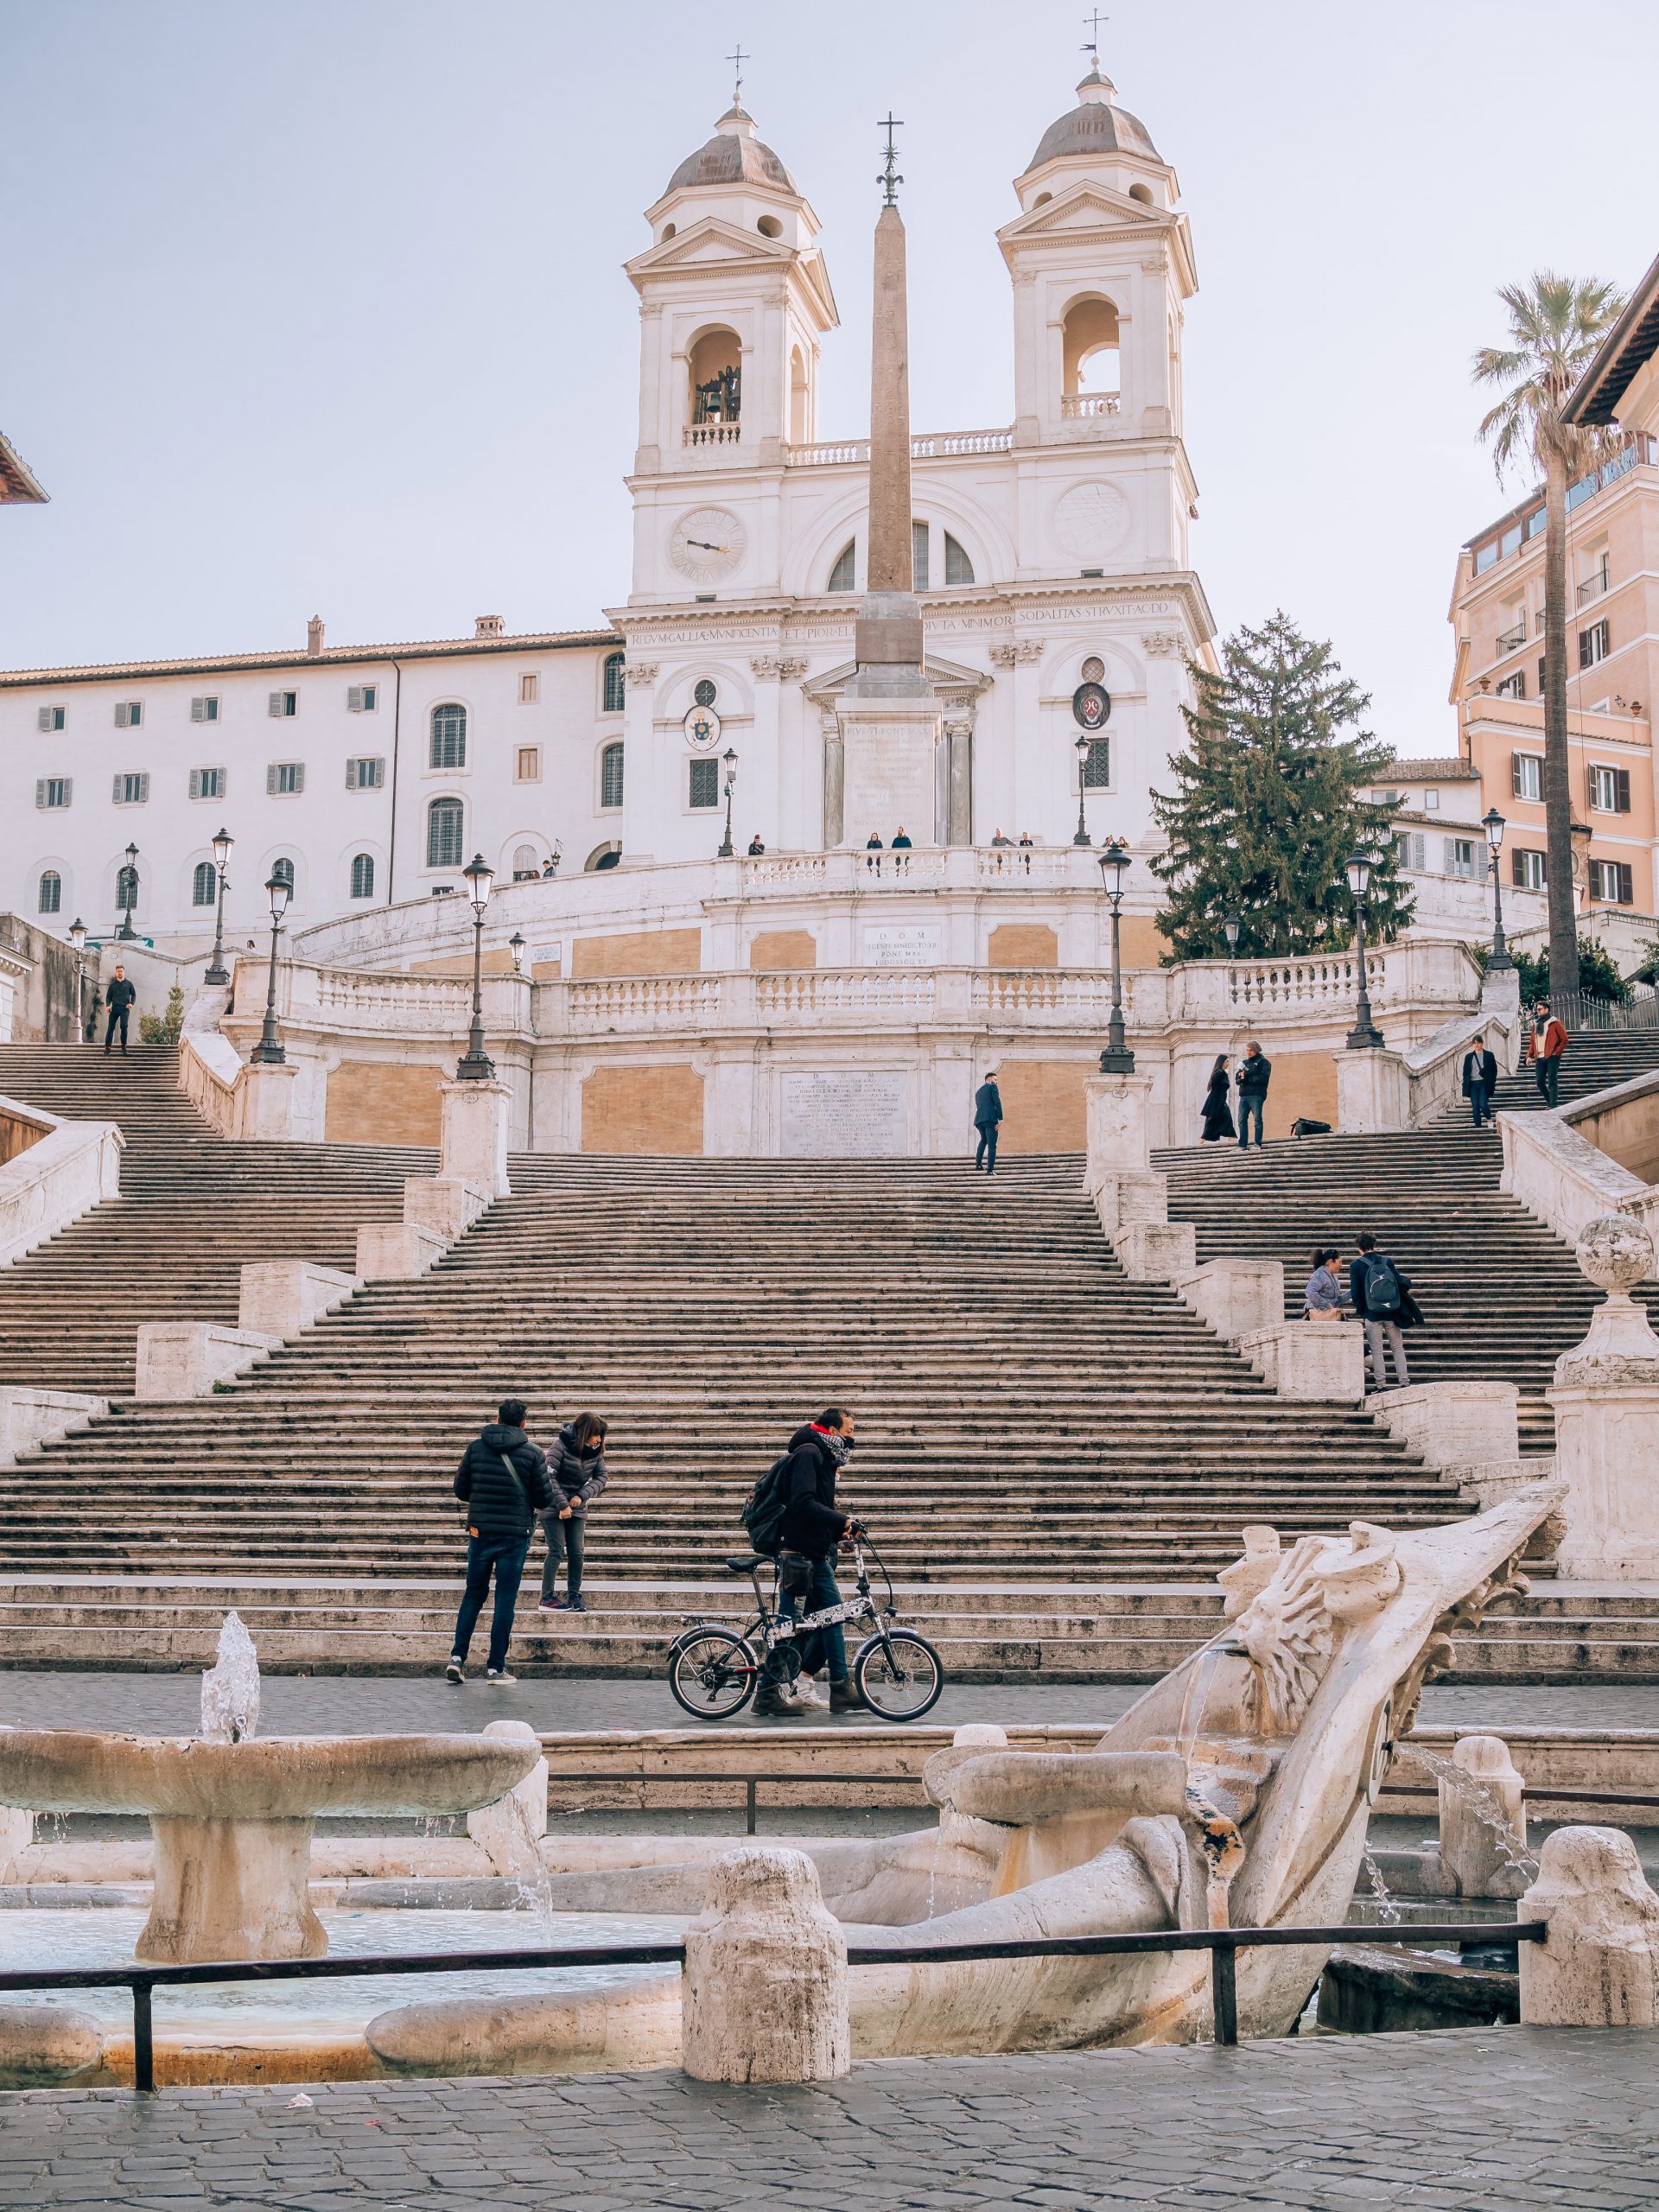 Spanish Steps - Why You Should Visit Rome in 2023